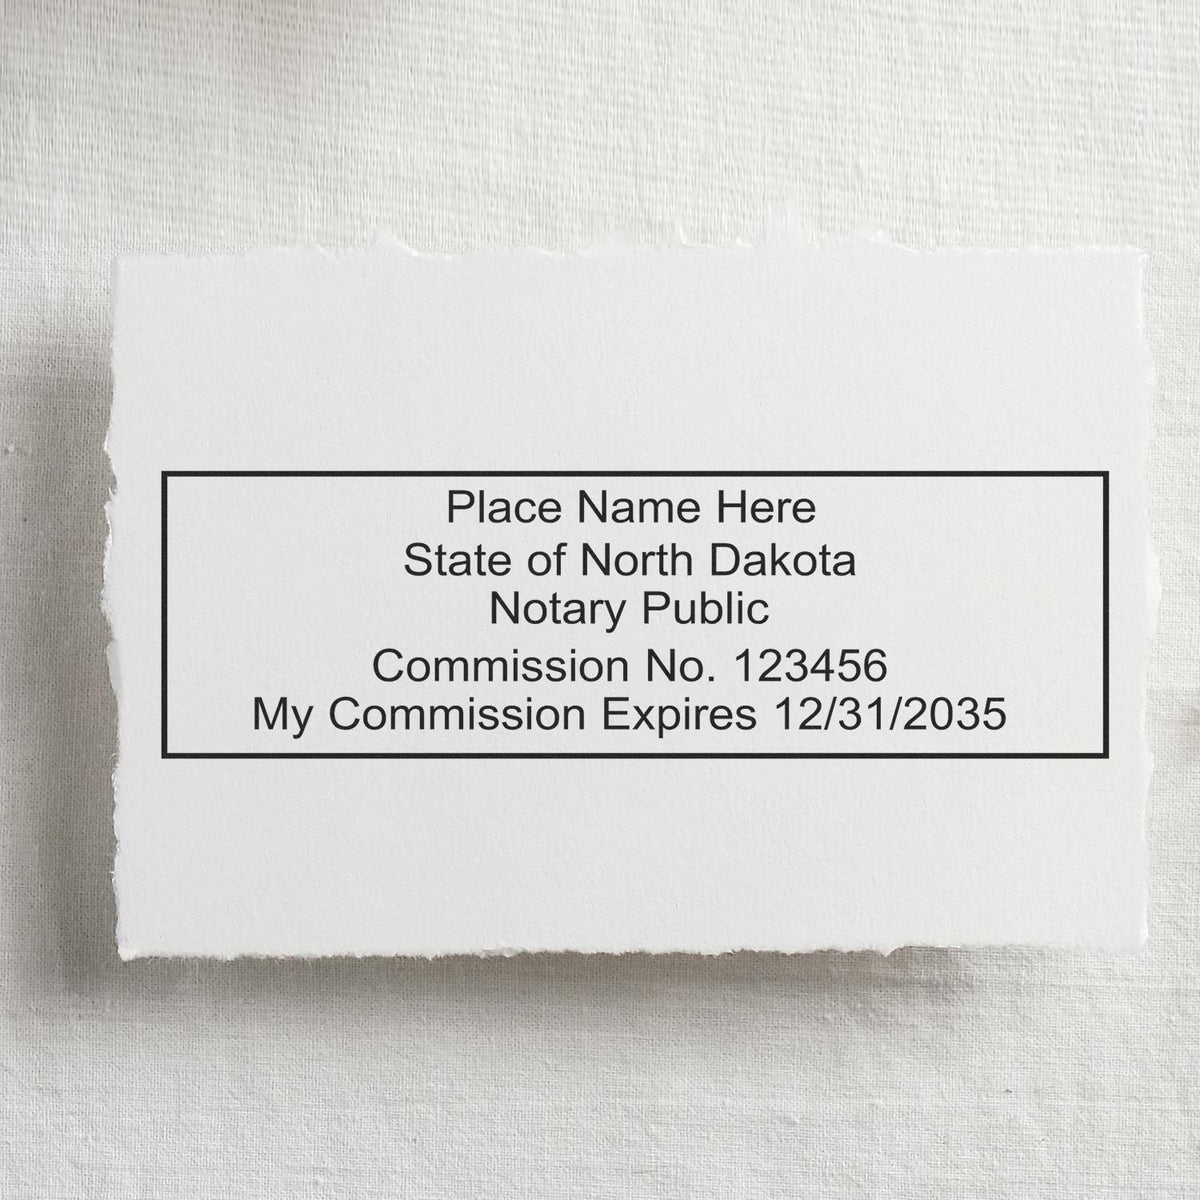 PSI North Dakota Notary Stamp in use photo showing a stamped imprint of the PSI North Dakota Notary Stamp